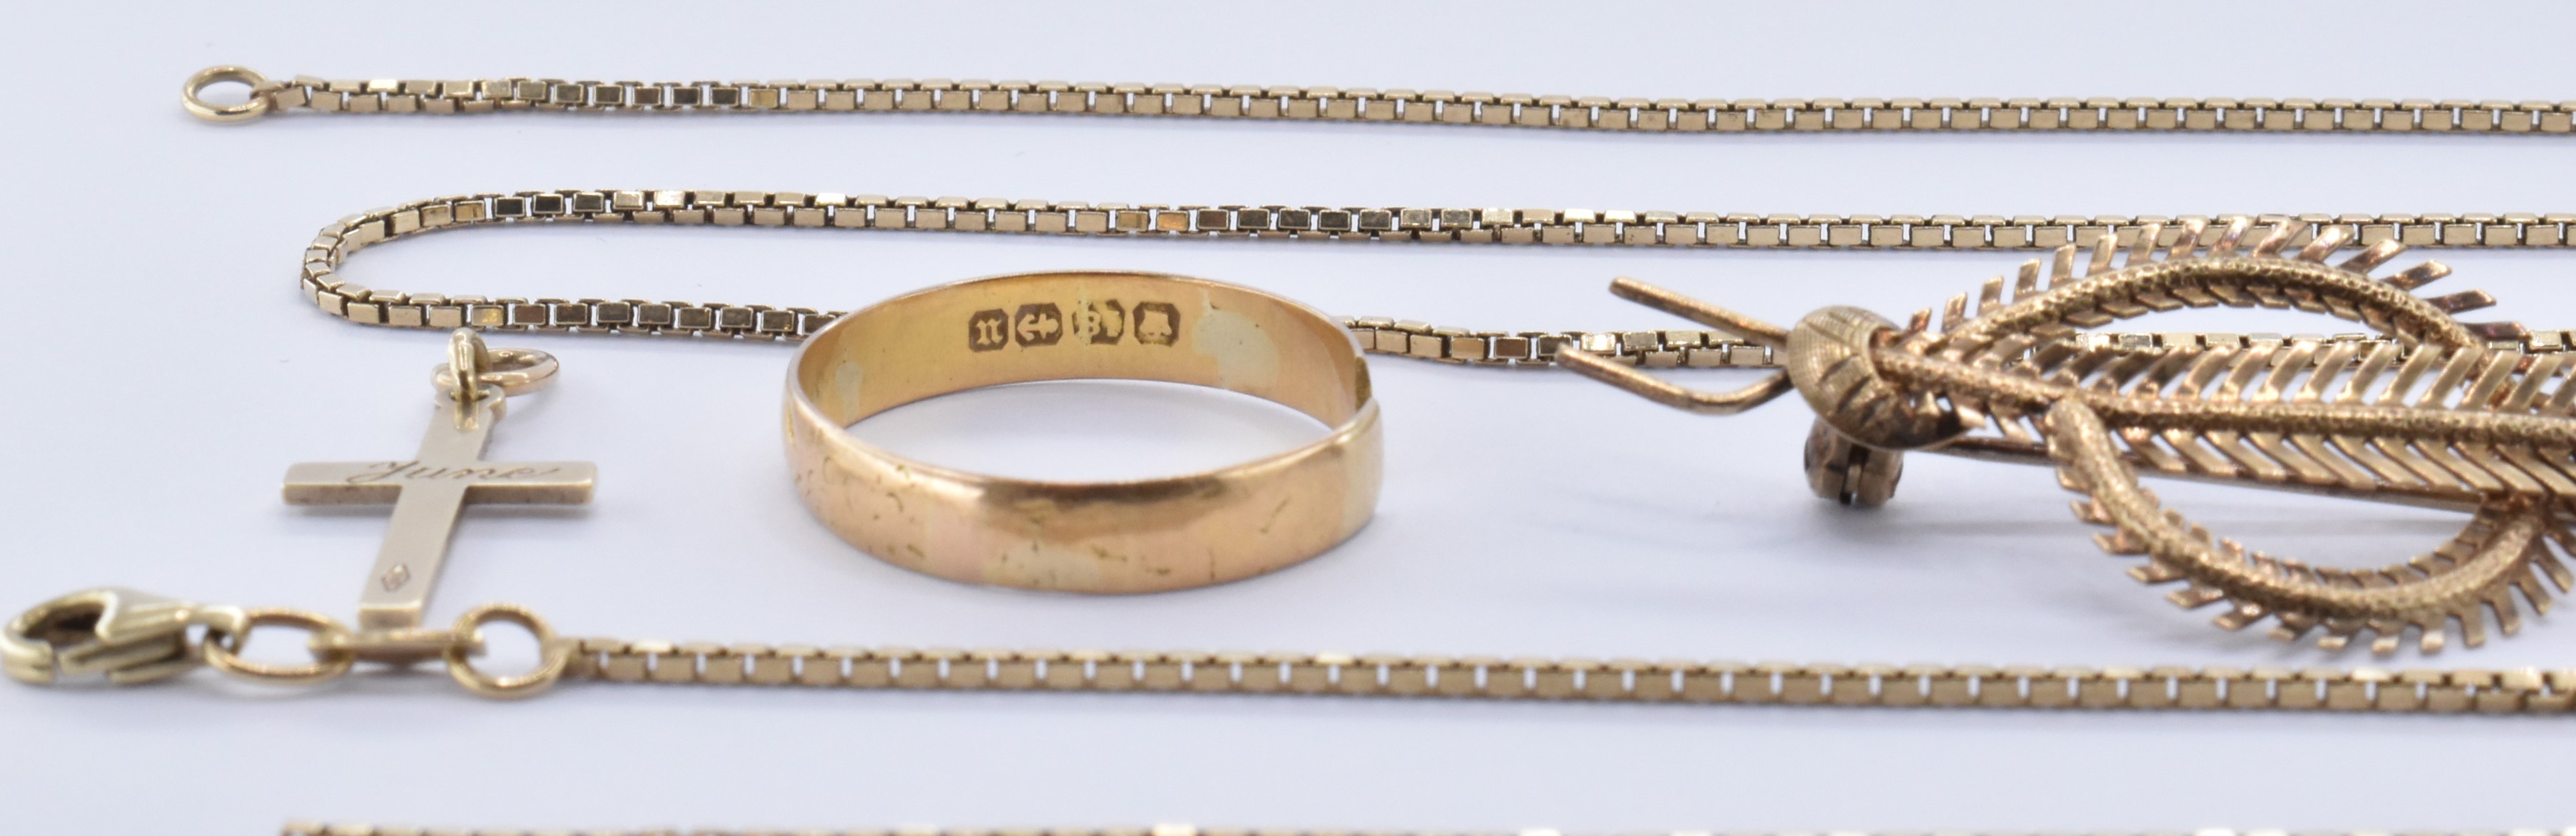 GROUP OF 20TH CENTURY GOLD JEWELLERY - Image 2 of 7